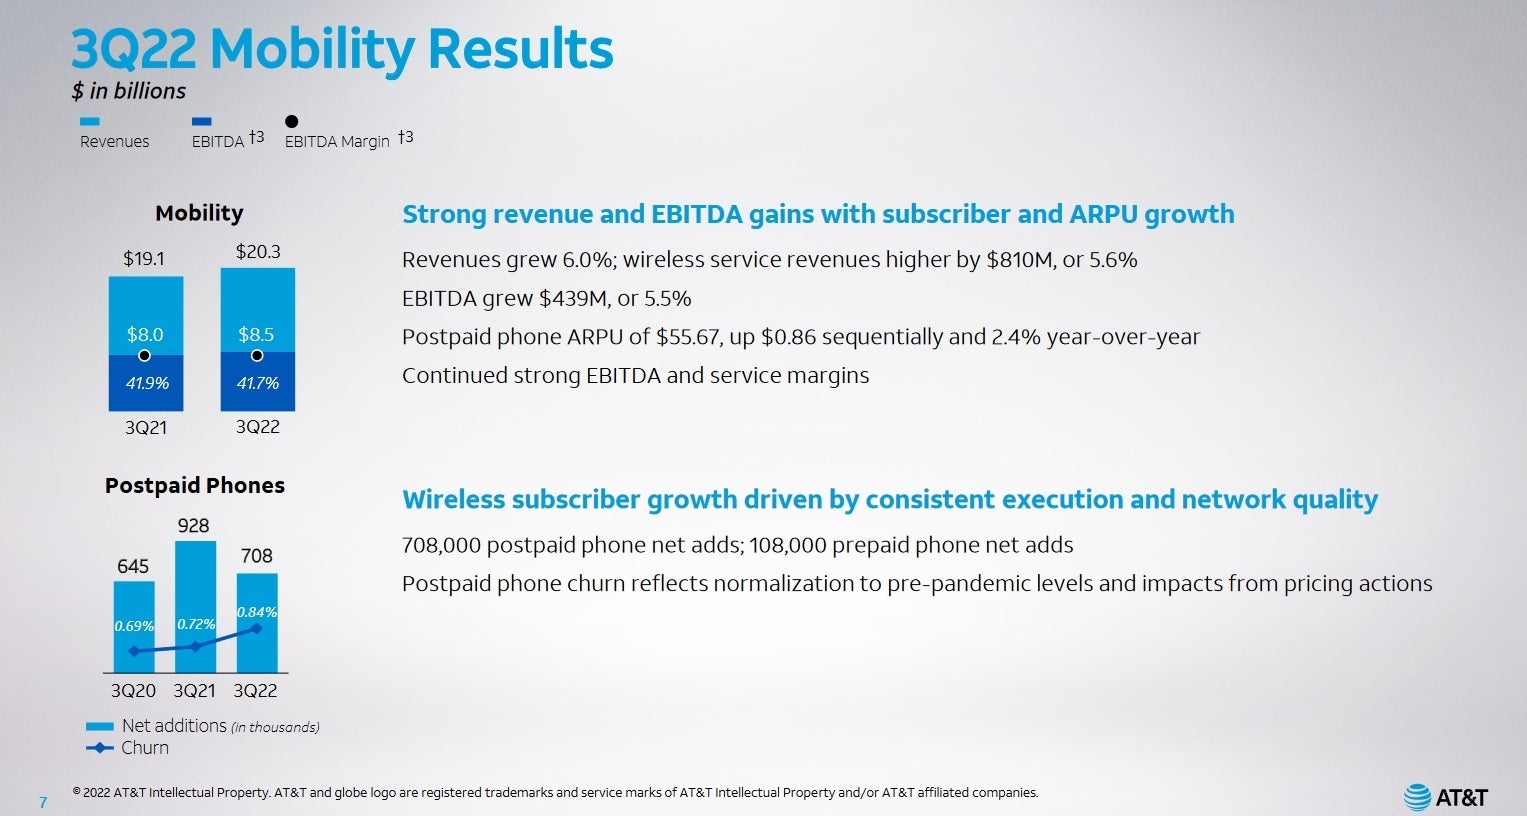 AT&amp;amp;T's mobility business showed strong revenue and EBITDA gains - AT&amp;T shares take flight as Q3 earnings are released